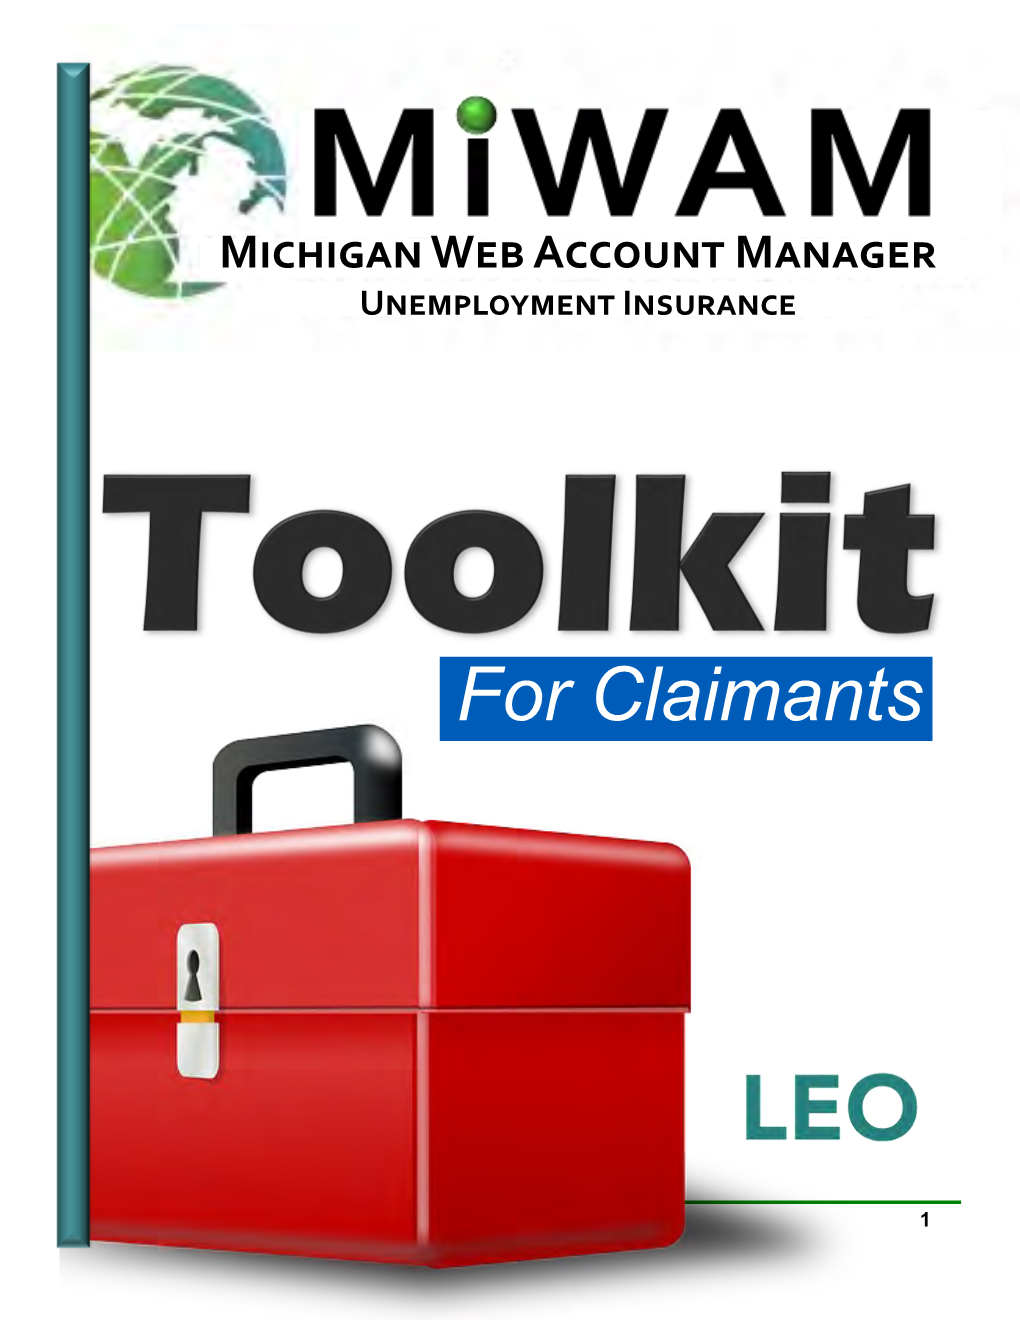 Miwam Toolkit for Claimants Revised: October 30, 2018 1